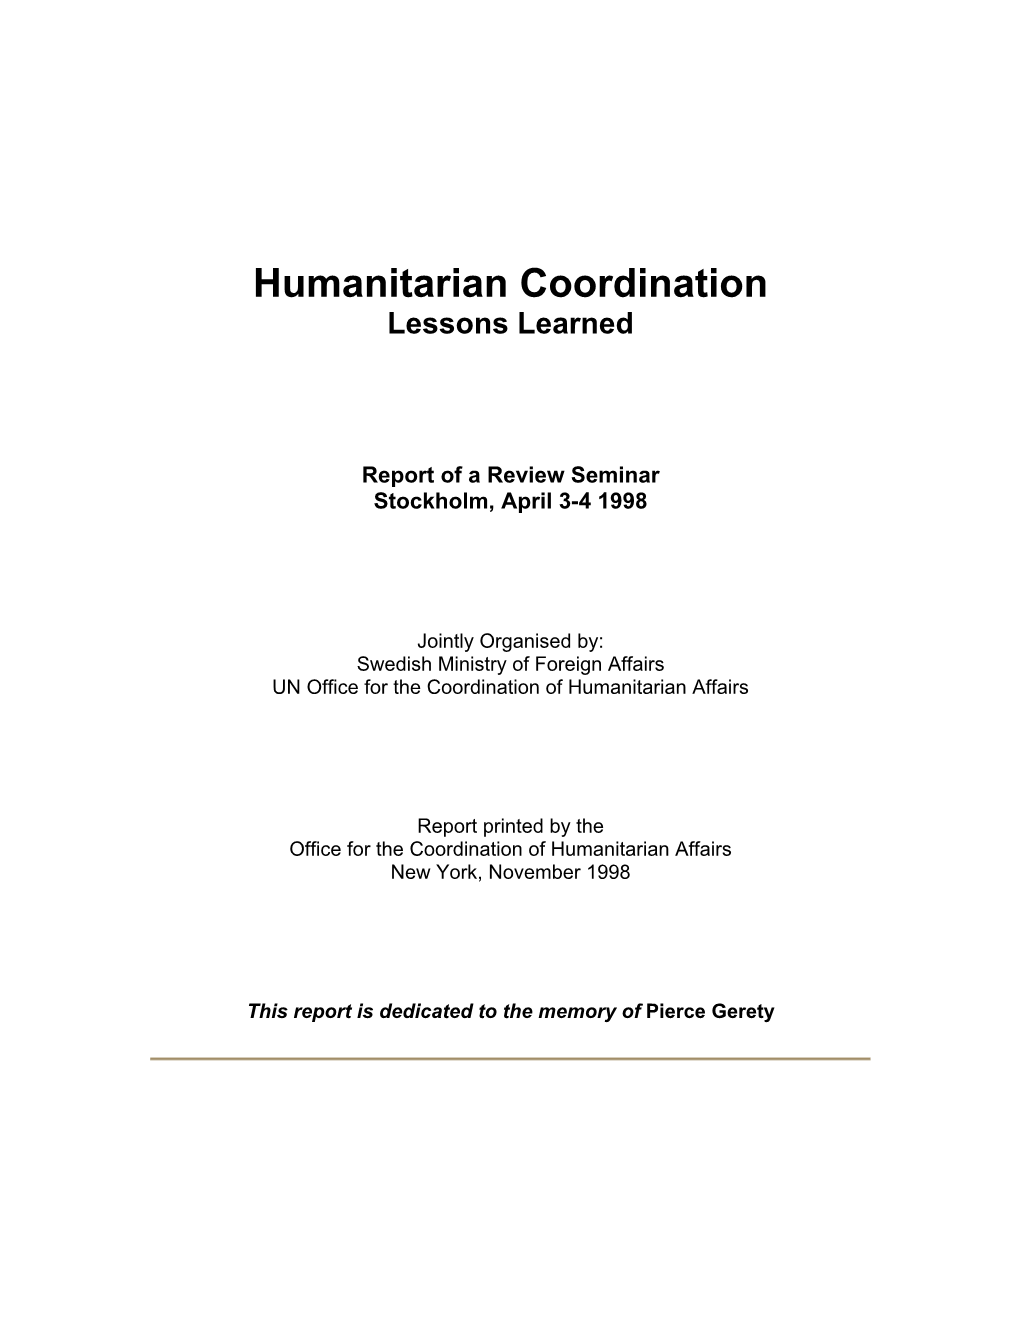 Humanitarian Coordination Lessons Learned